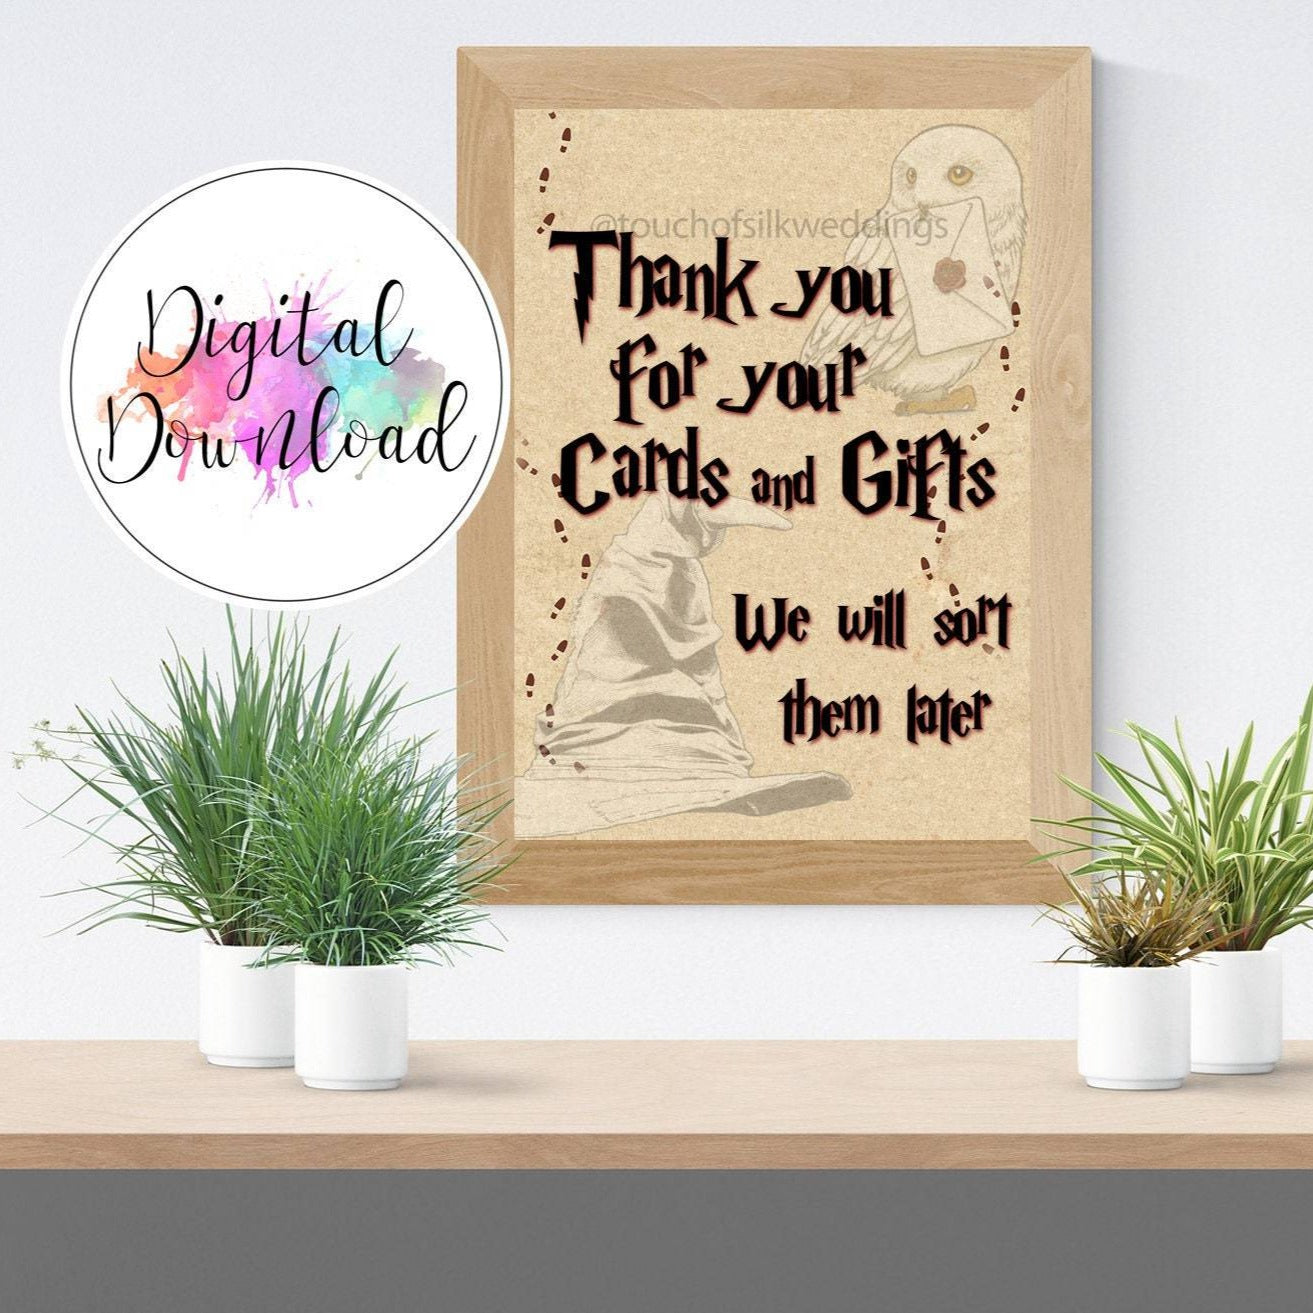 Printable Cards & Gifts Sign